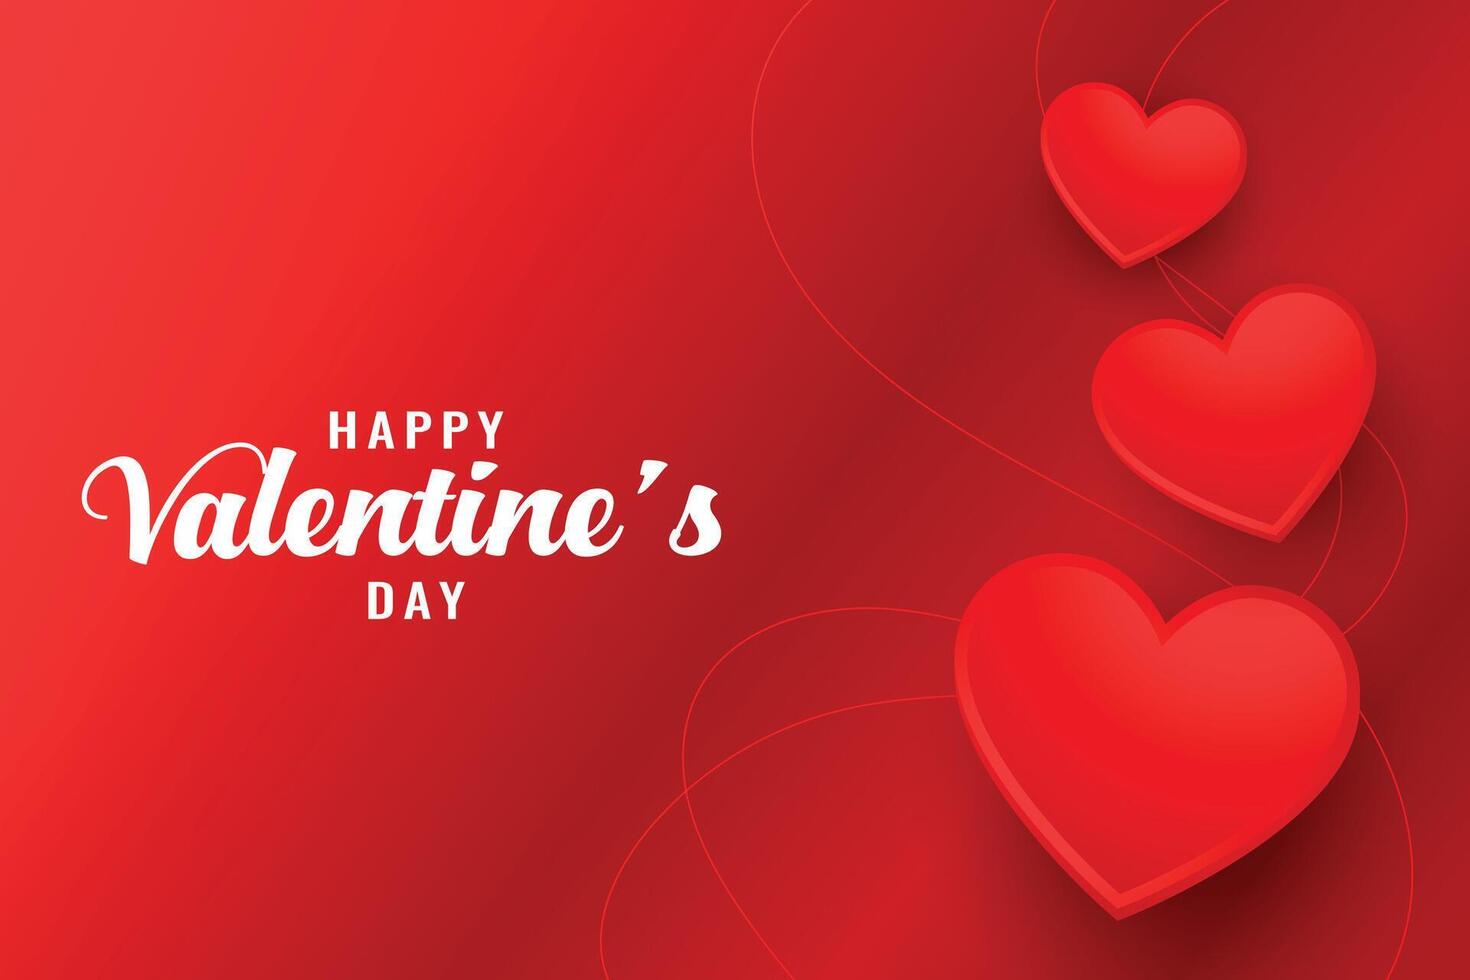 happy valentines day beautiful red hearts greeting background vector